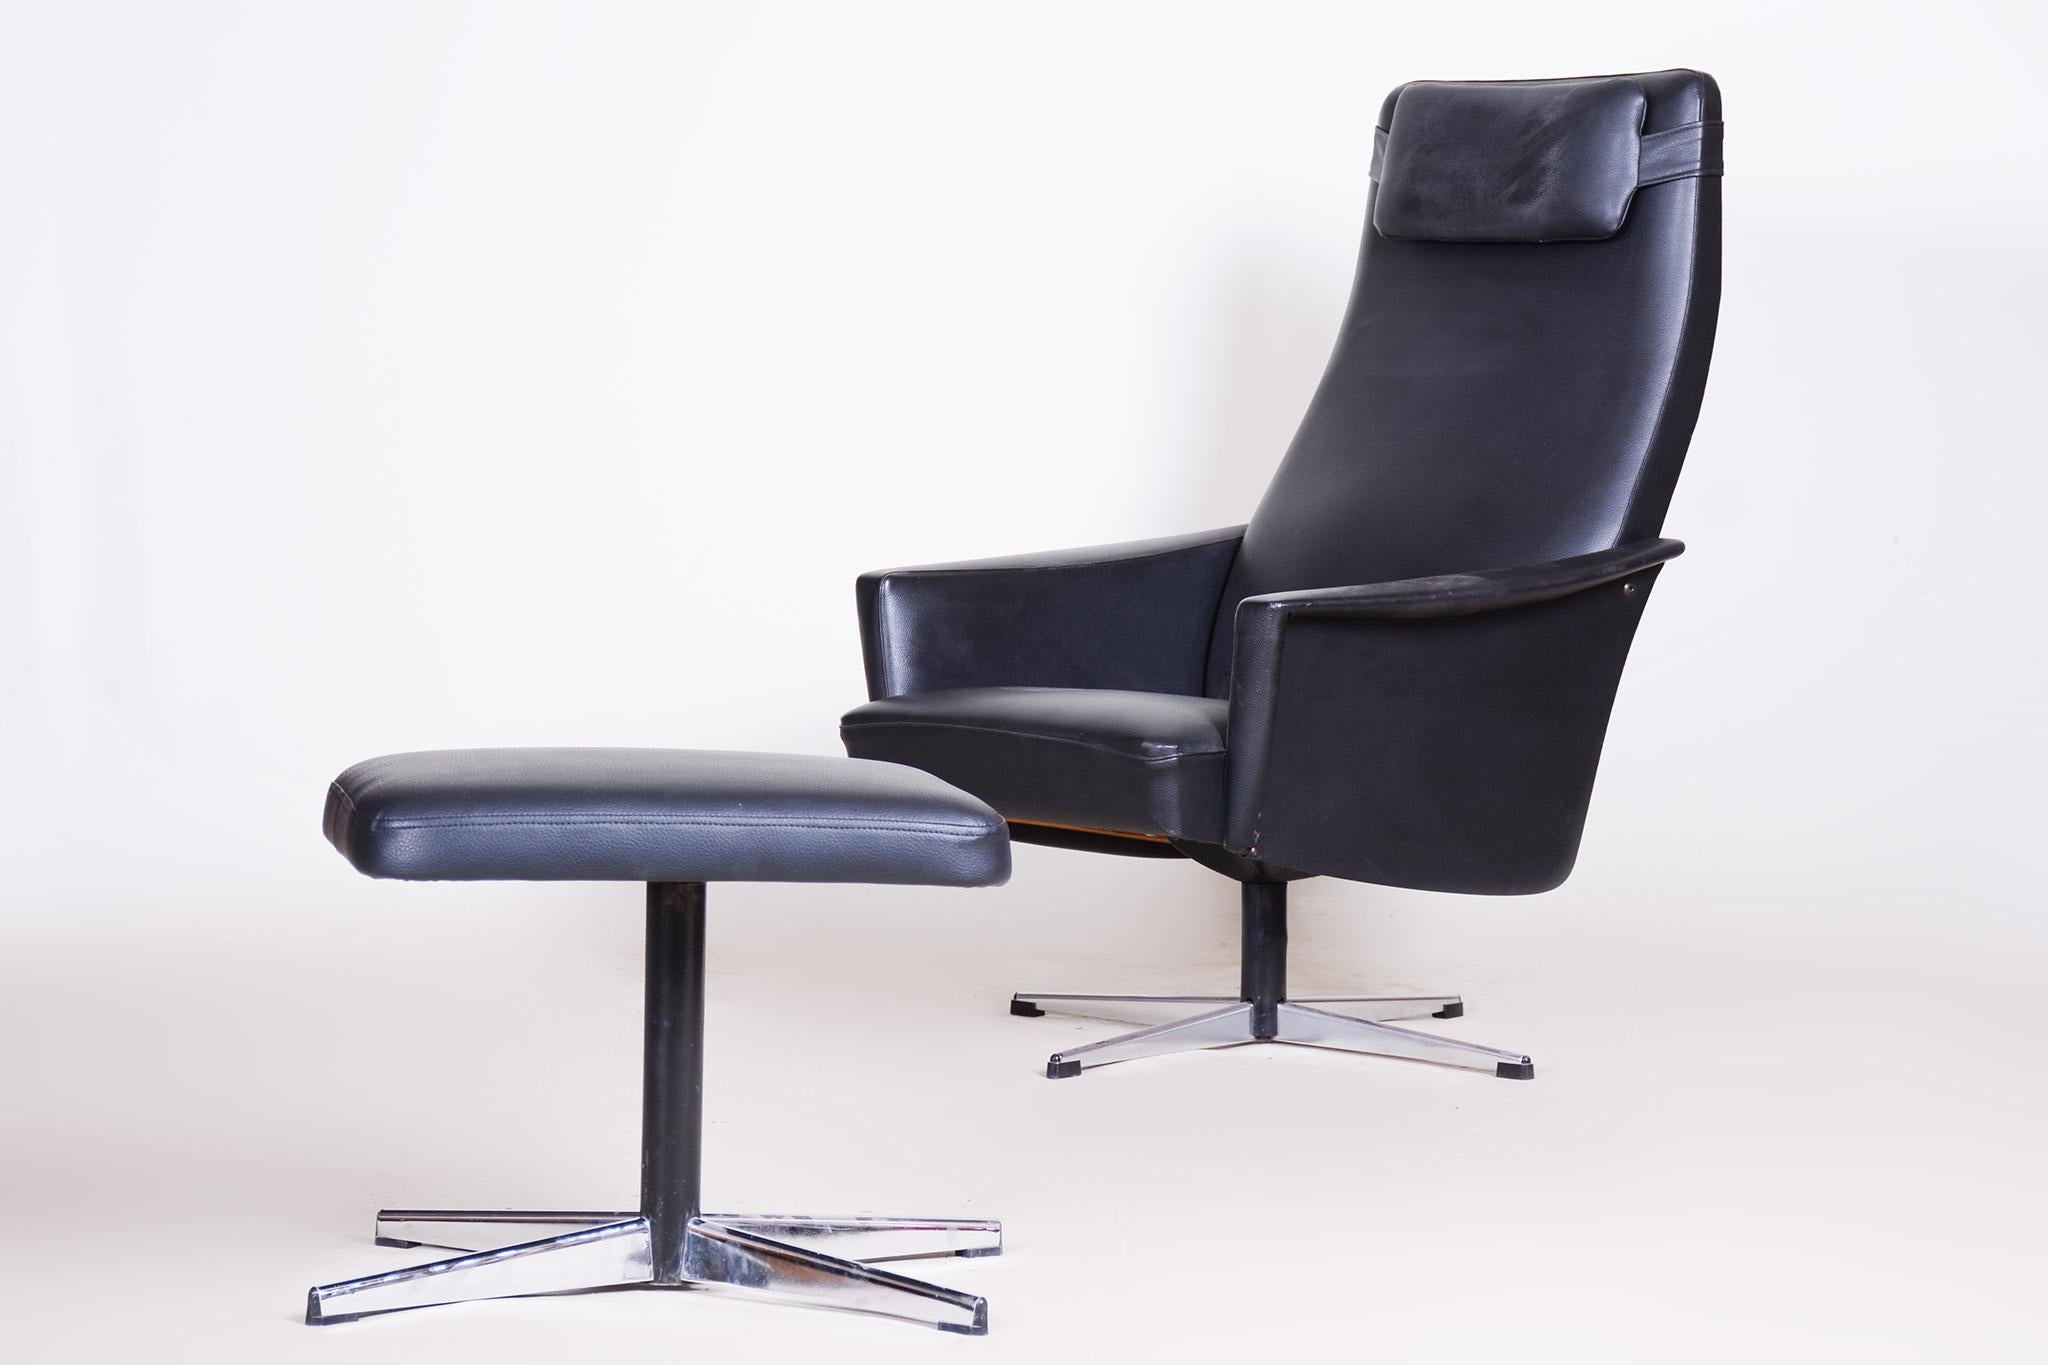 Vegan Leather Bauhaus Swivel Chair with Foot Stool, Made in 1960s Czechia For Sale 3